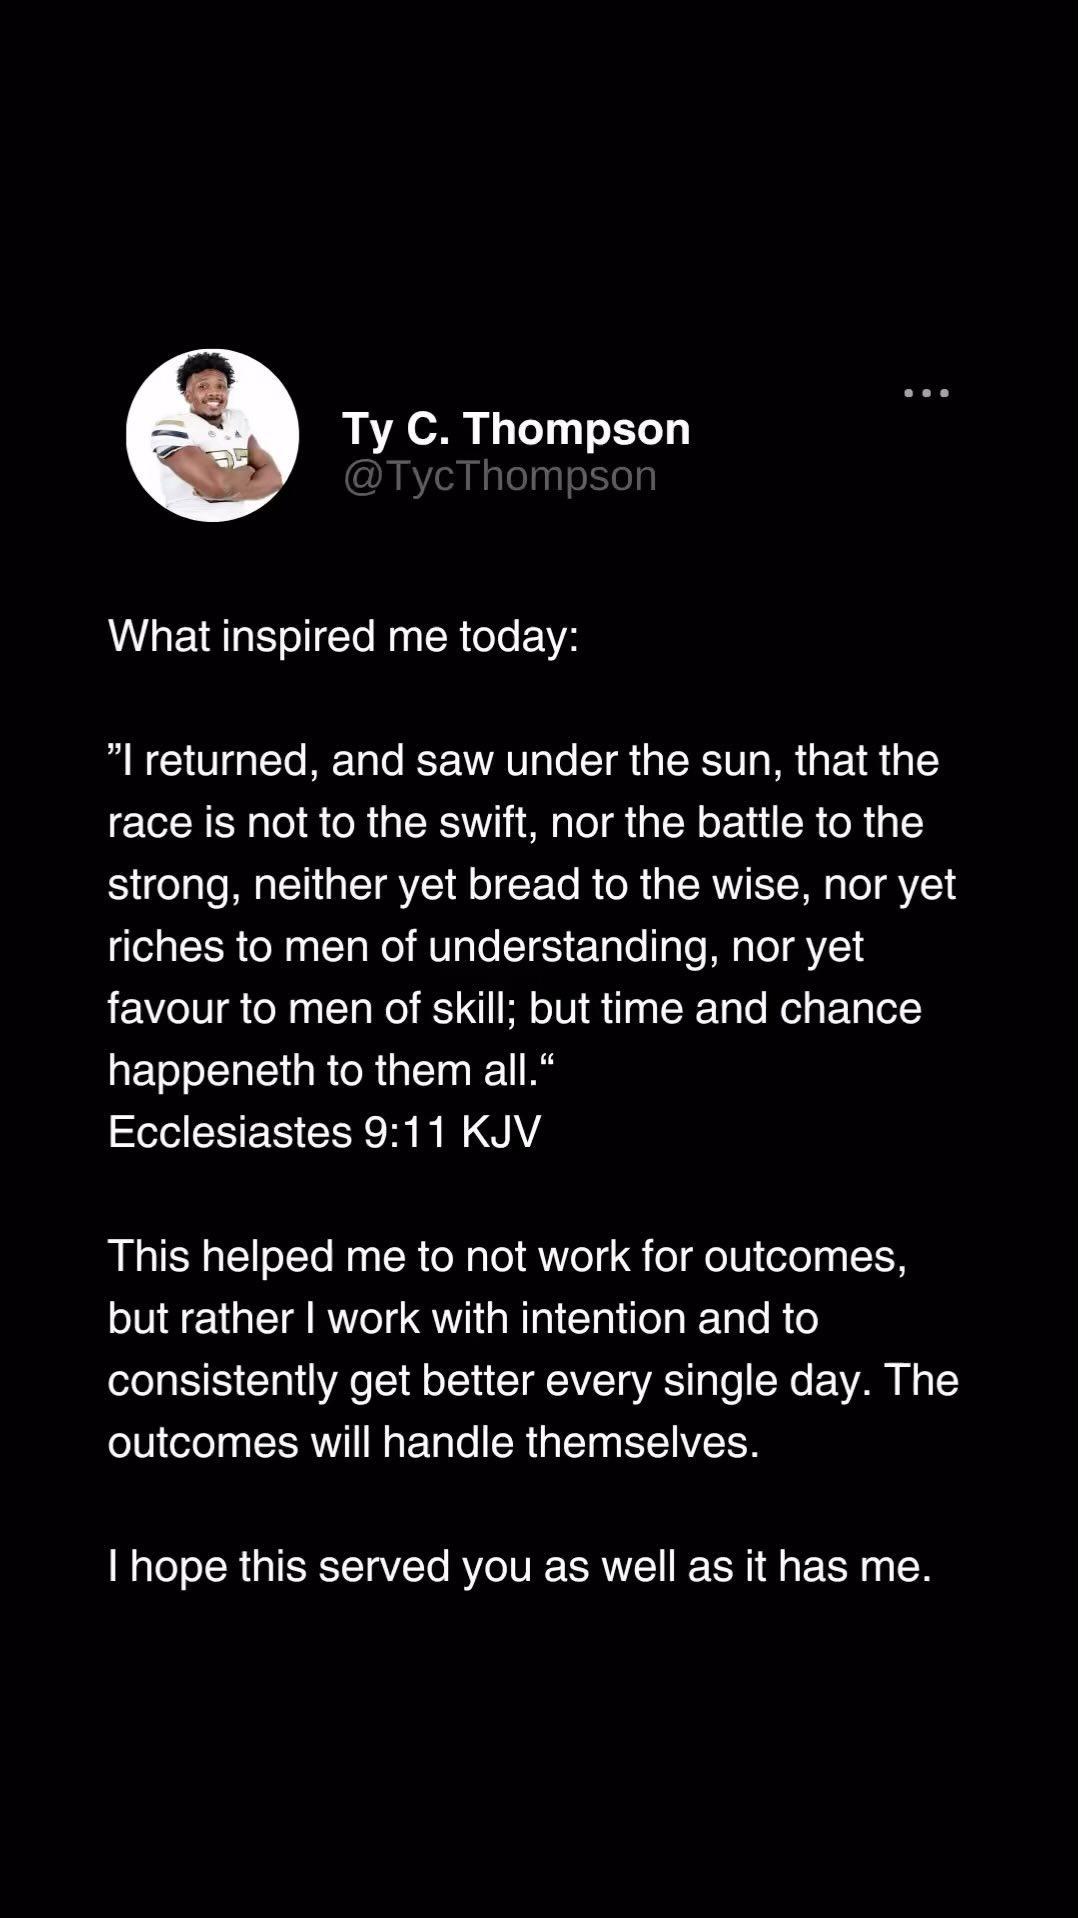 Ty Thompson Instagram Post Influencer Campaign